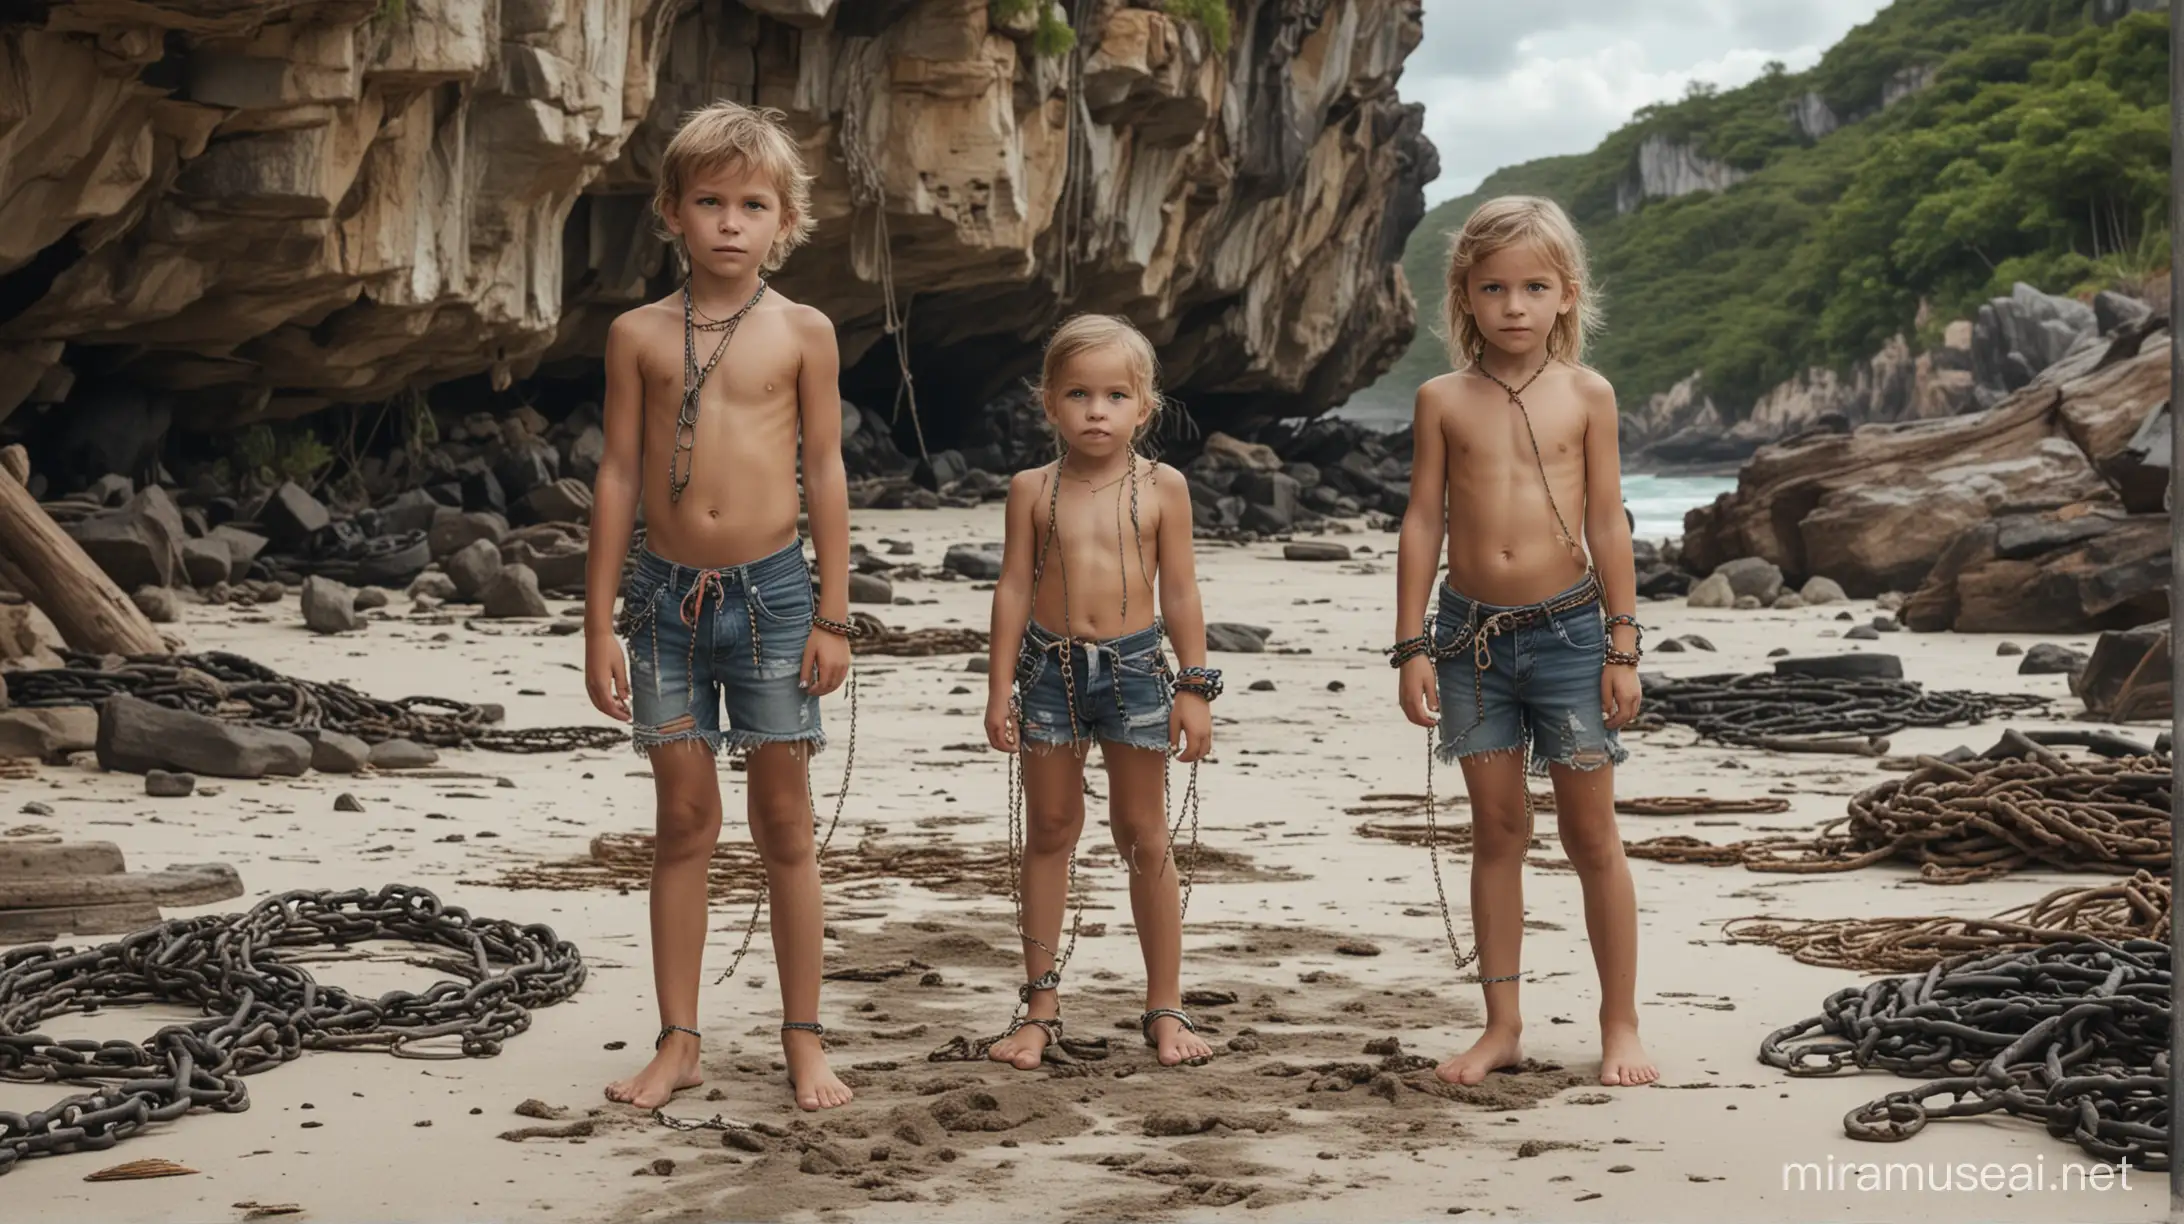 Surviving Family on Island Skinny Parents and Kids in Ripped Clothes